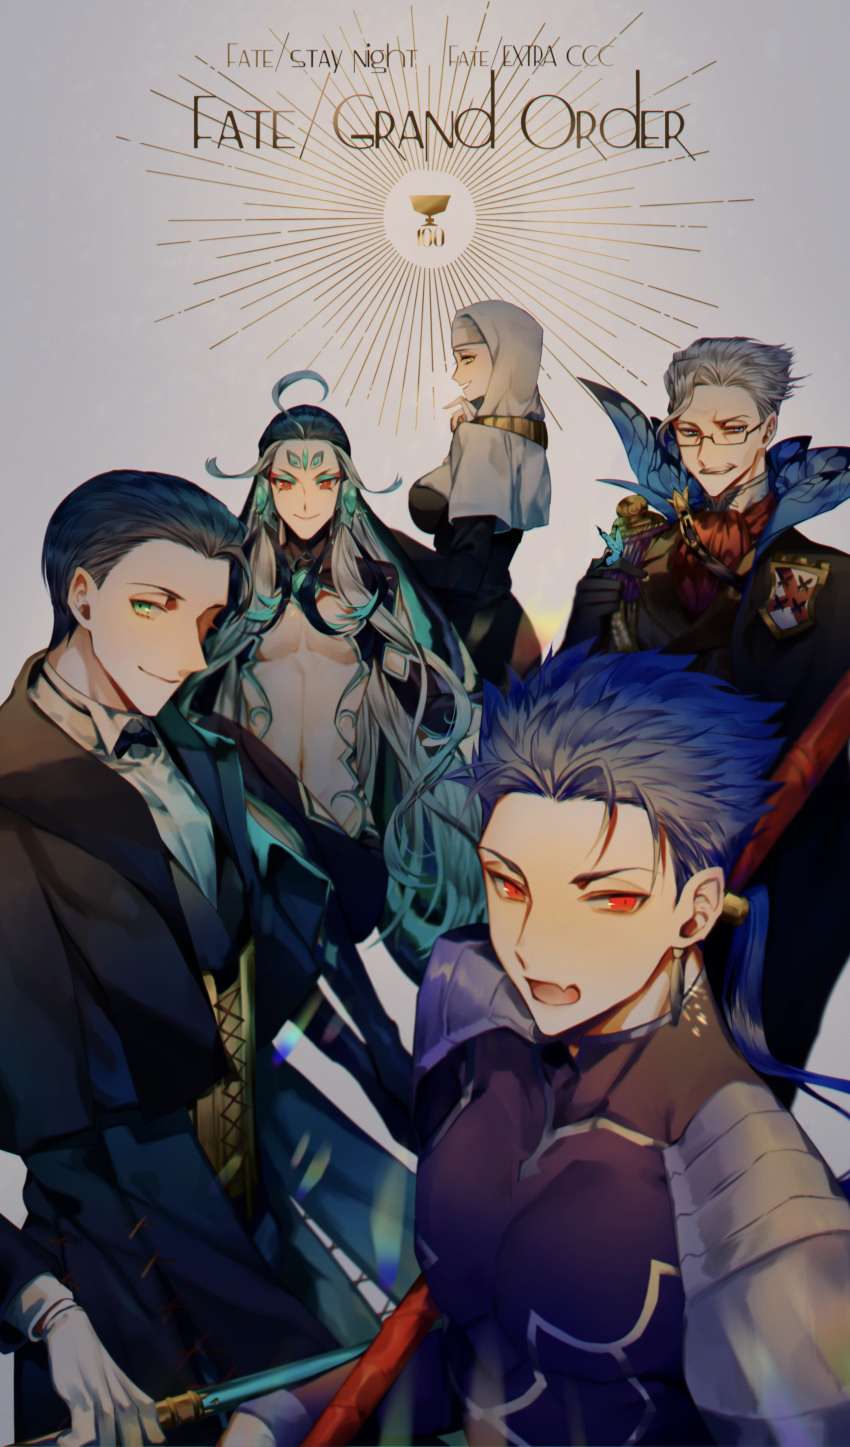 1girl 4boys absurdres ahoge albino_(a1b1n0623) bangs black_hair blue_eyes blue_hair blush breasts bug butterfly cane chest copyright_name cu_chulainn_(fate)_(all) earrings english_text eyeshadow fabulous facial_hair facial_mark fang fate/extra fate/extra_ccc fate/grand_order fate_(series) forehead_jewel forehead_mark formal gae_bolg glasses gloves green_eyes grey_hair hair_slicked_back highres holding holy_grail_(fate) insect jacket james_moriarty_(fate/grand_order) jewelry lancer large_breasts light_smile long_hair long_sleeves looking_at_viewer makeup male_focus multicolored_hair multiple_boys mustache navel number nun open_mouth parted_bangs polearm ponytail qin_shi_huang_(fate/grand_order) red_eyes revealing_clothes sesshouin_kiara sherlock_holmes_(fate/grand_order) shiny shiny_hair short_hair smile smirk spear tight two-tone_hair upper_body very_long_hair vest weapon white_hair white_headwear yellow_eyes